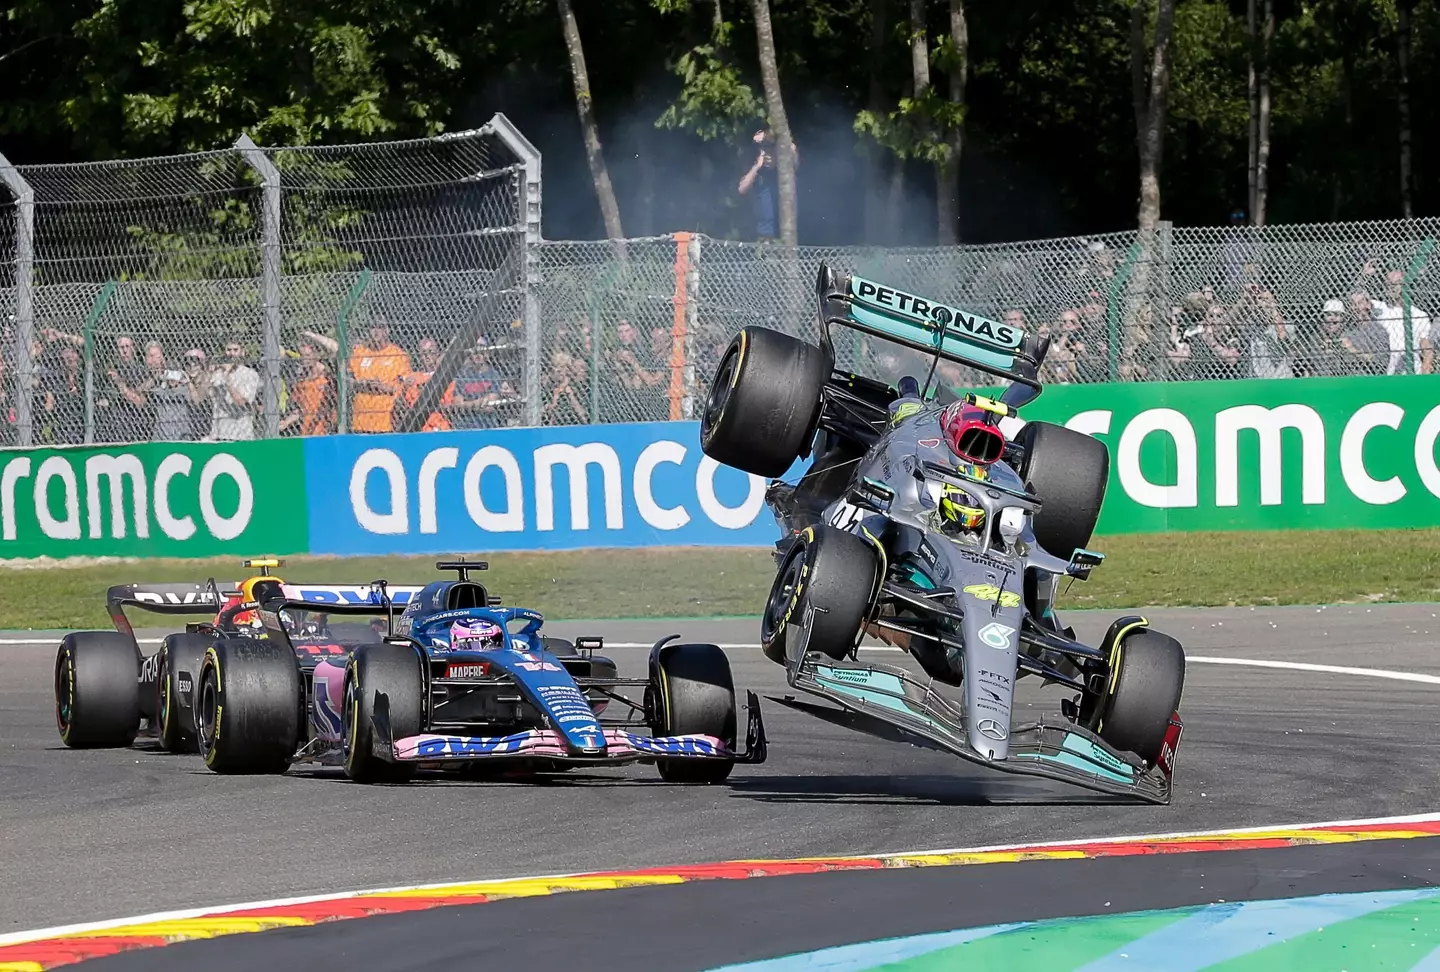 Hamilton was involved in a collision with Fernando Alonso.